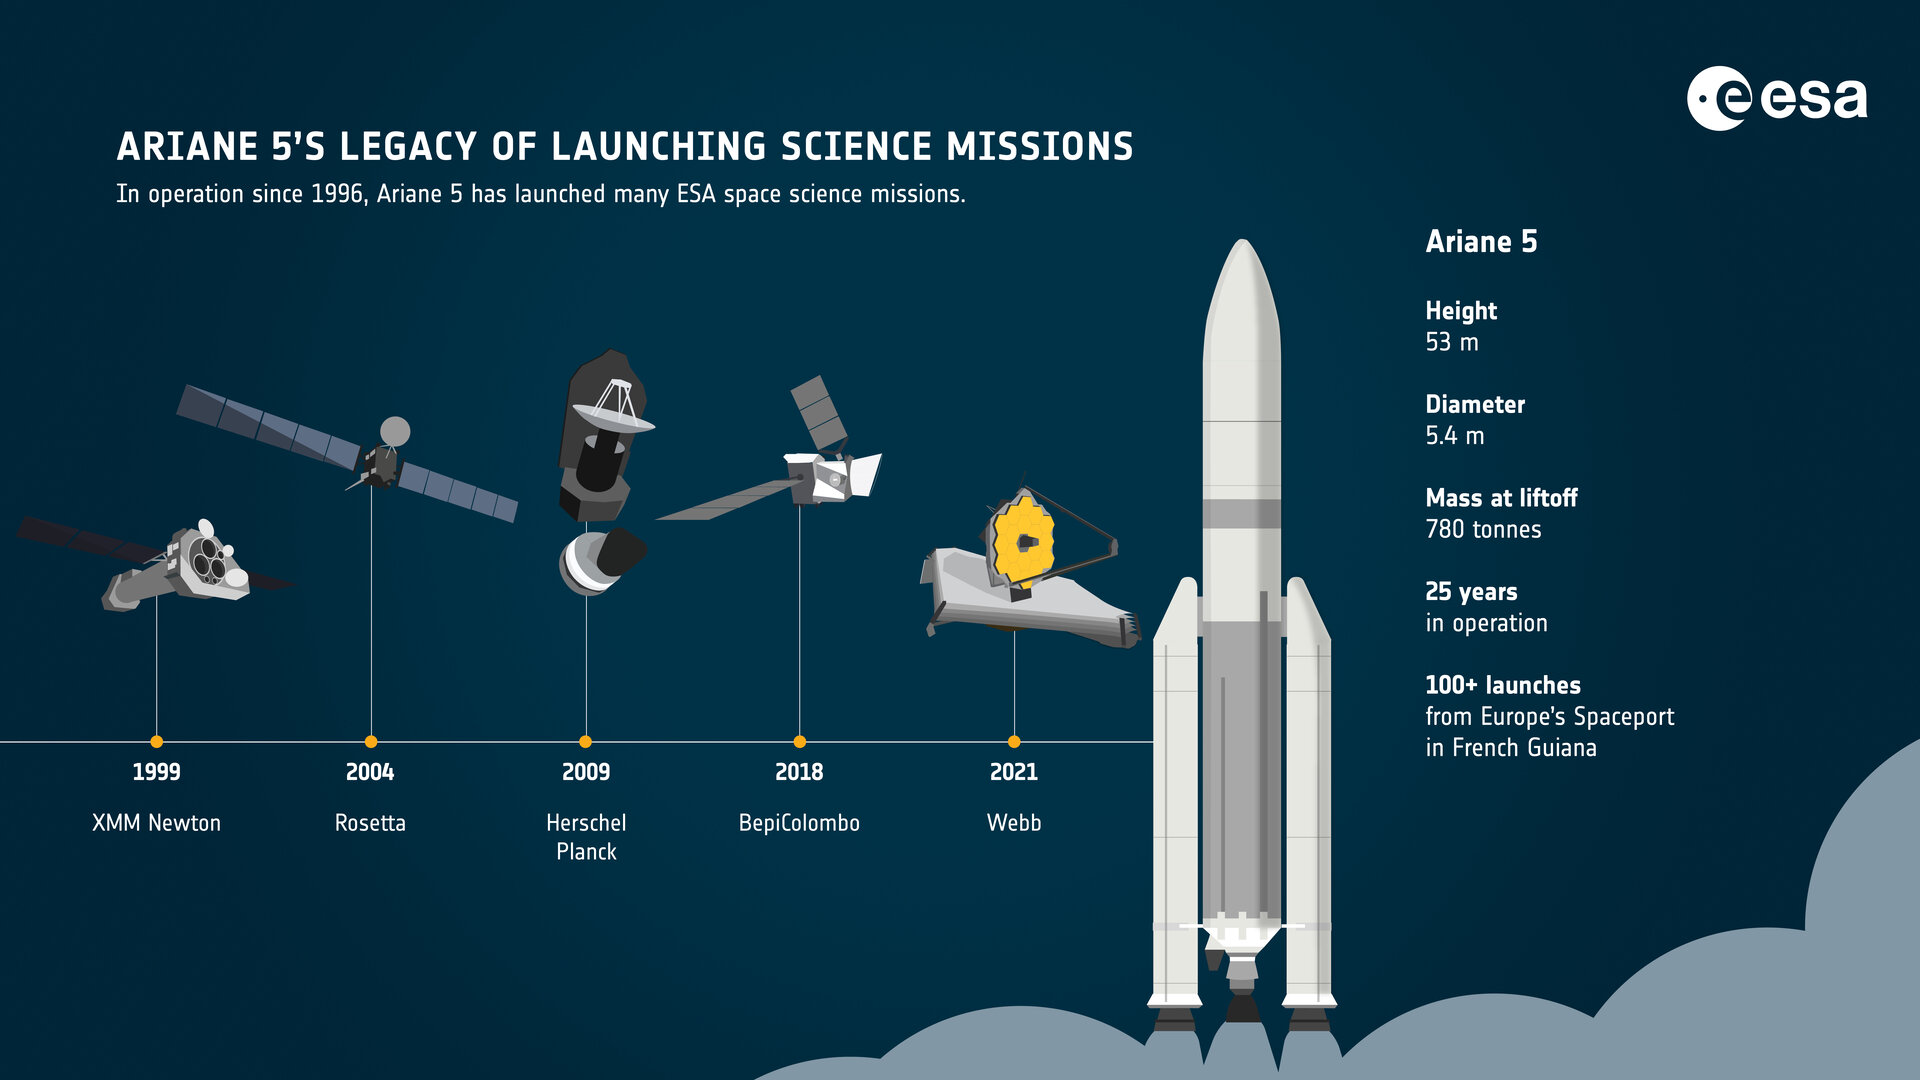 ESA - Ariane 5's legacy of launching science missions